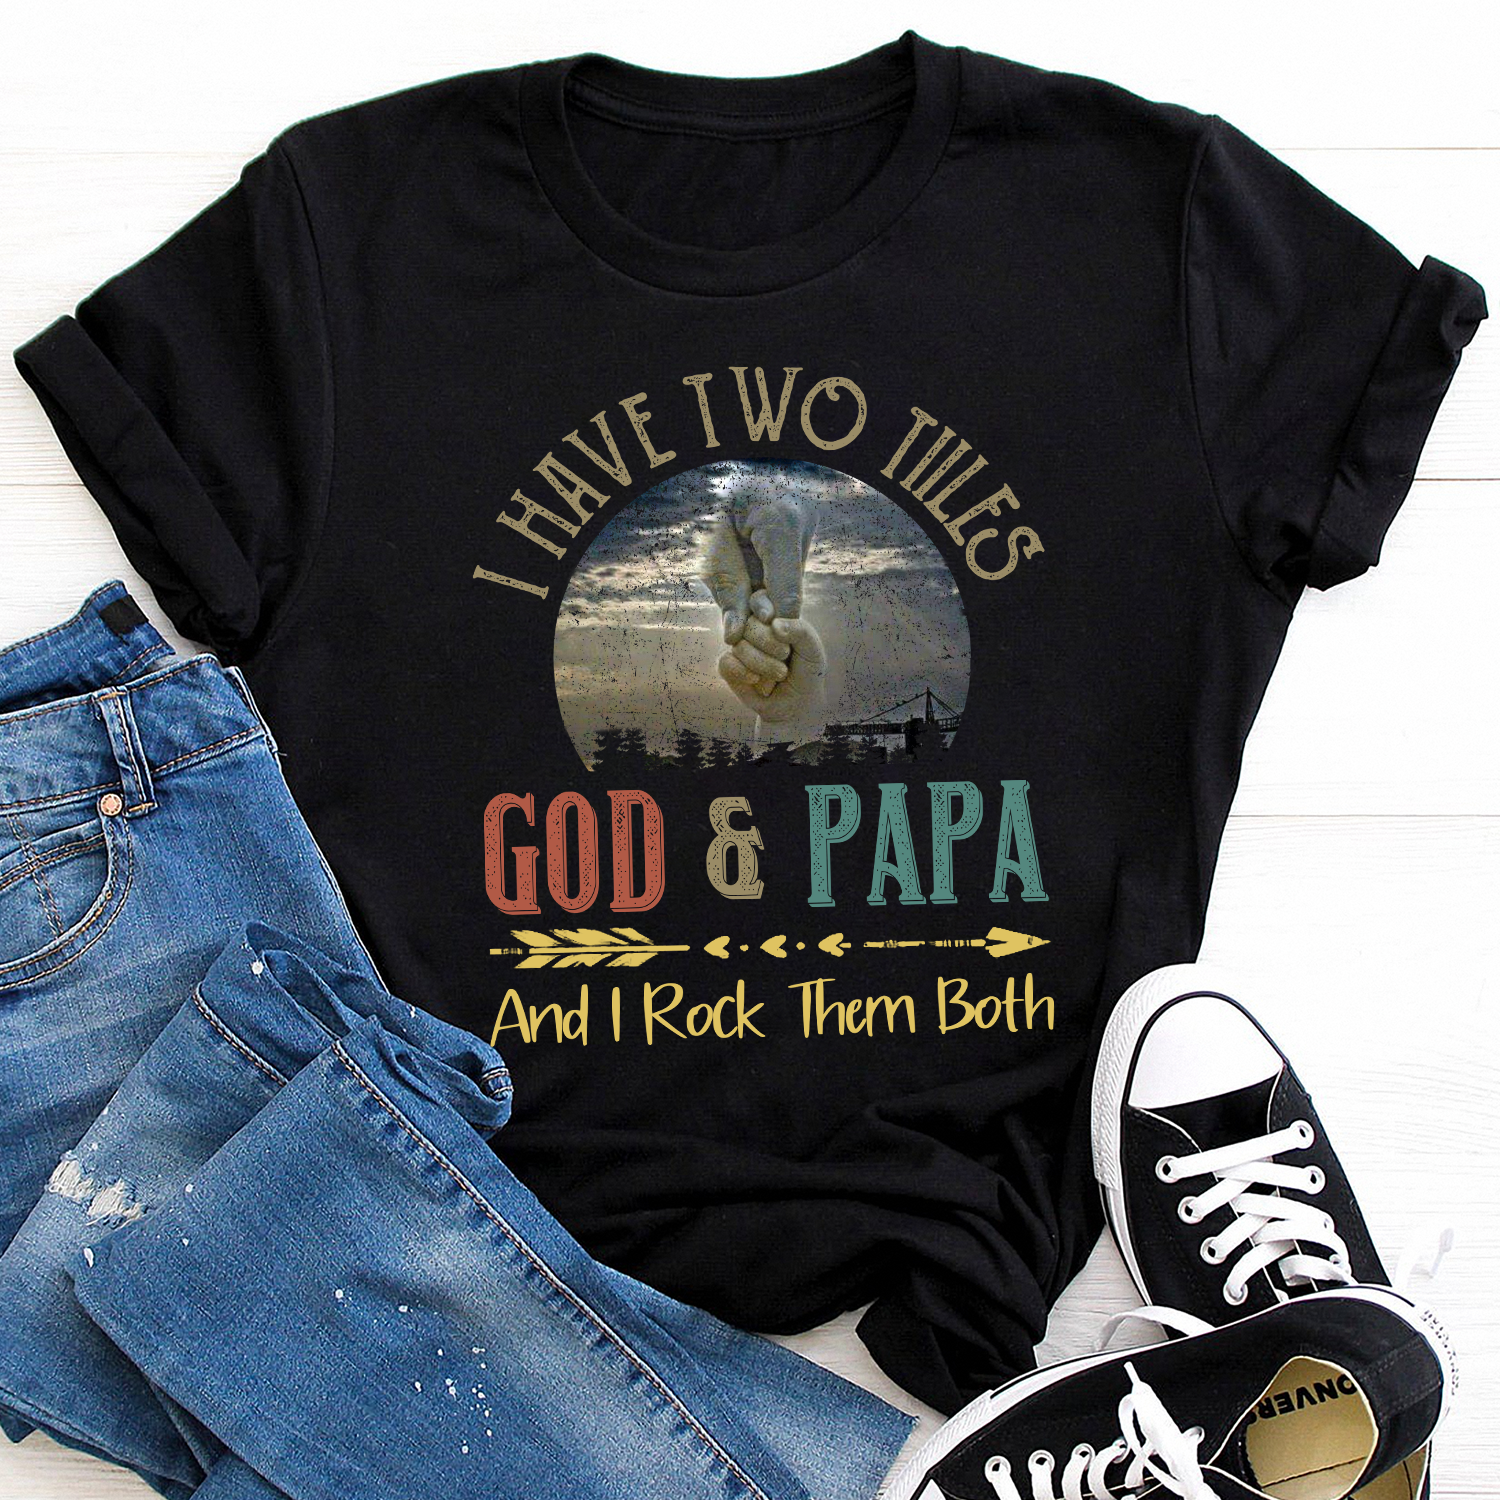 I Have Two Titles God and Papa and Rock Them Both T-Shirt